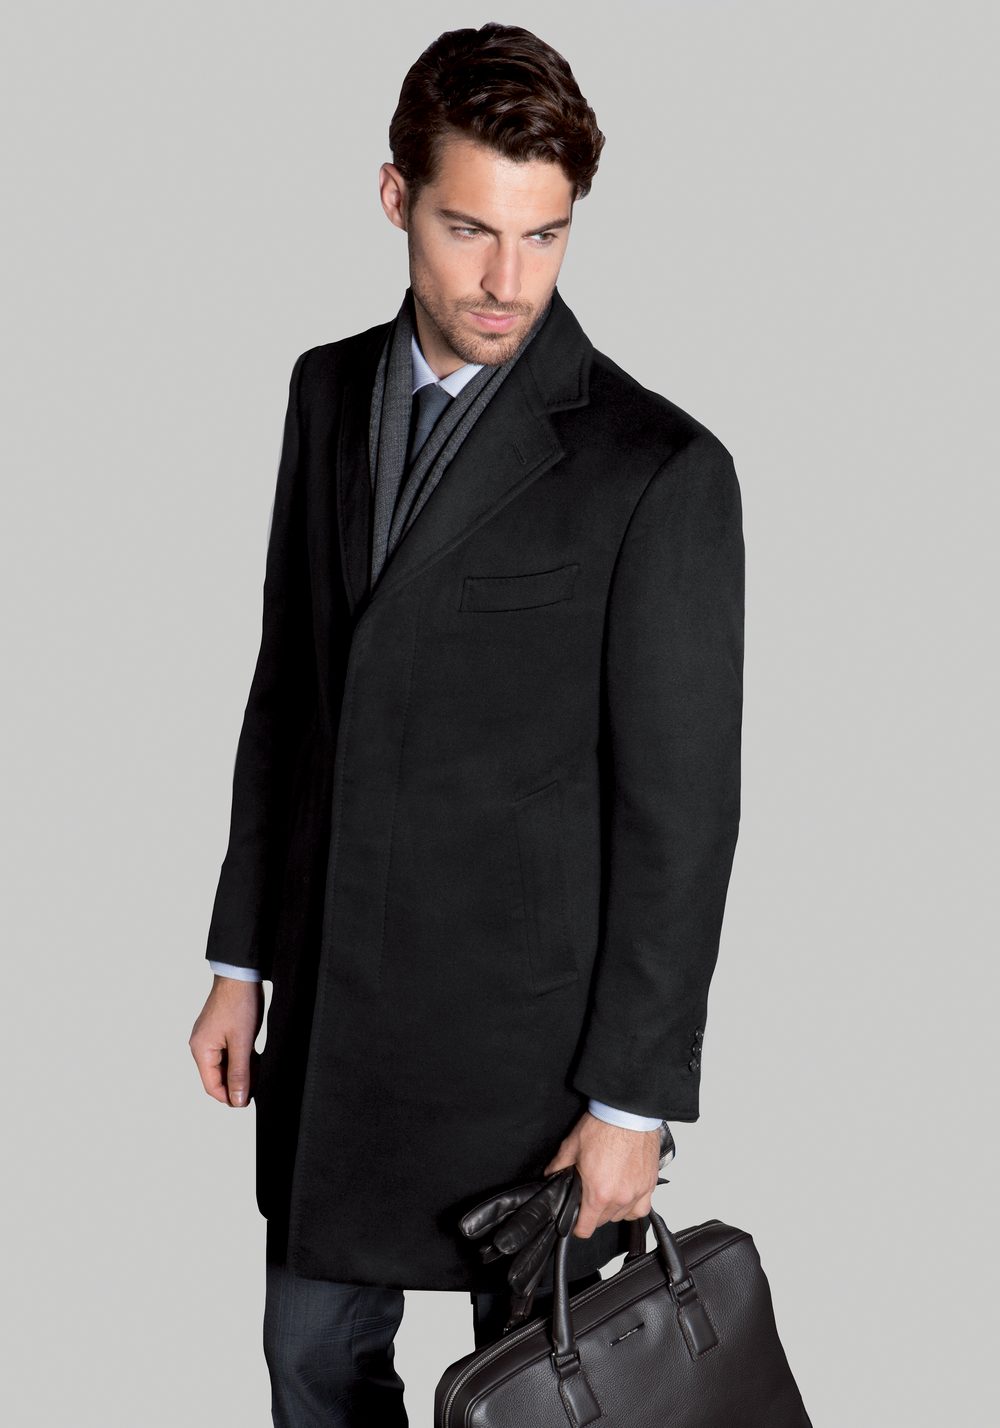 CUSTOM MADE OVERCOATS BY LABEL - Label Custom Clothing